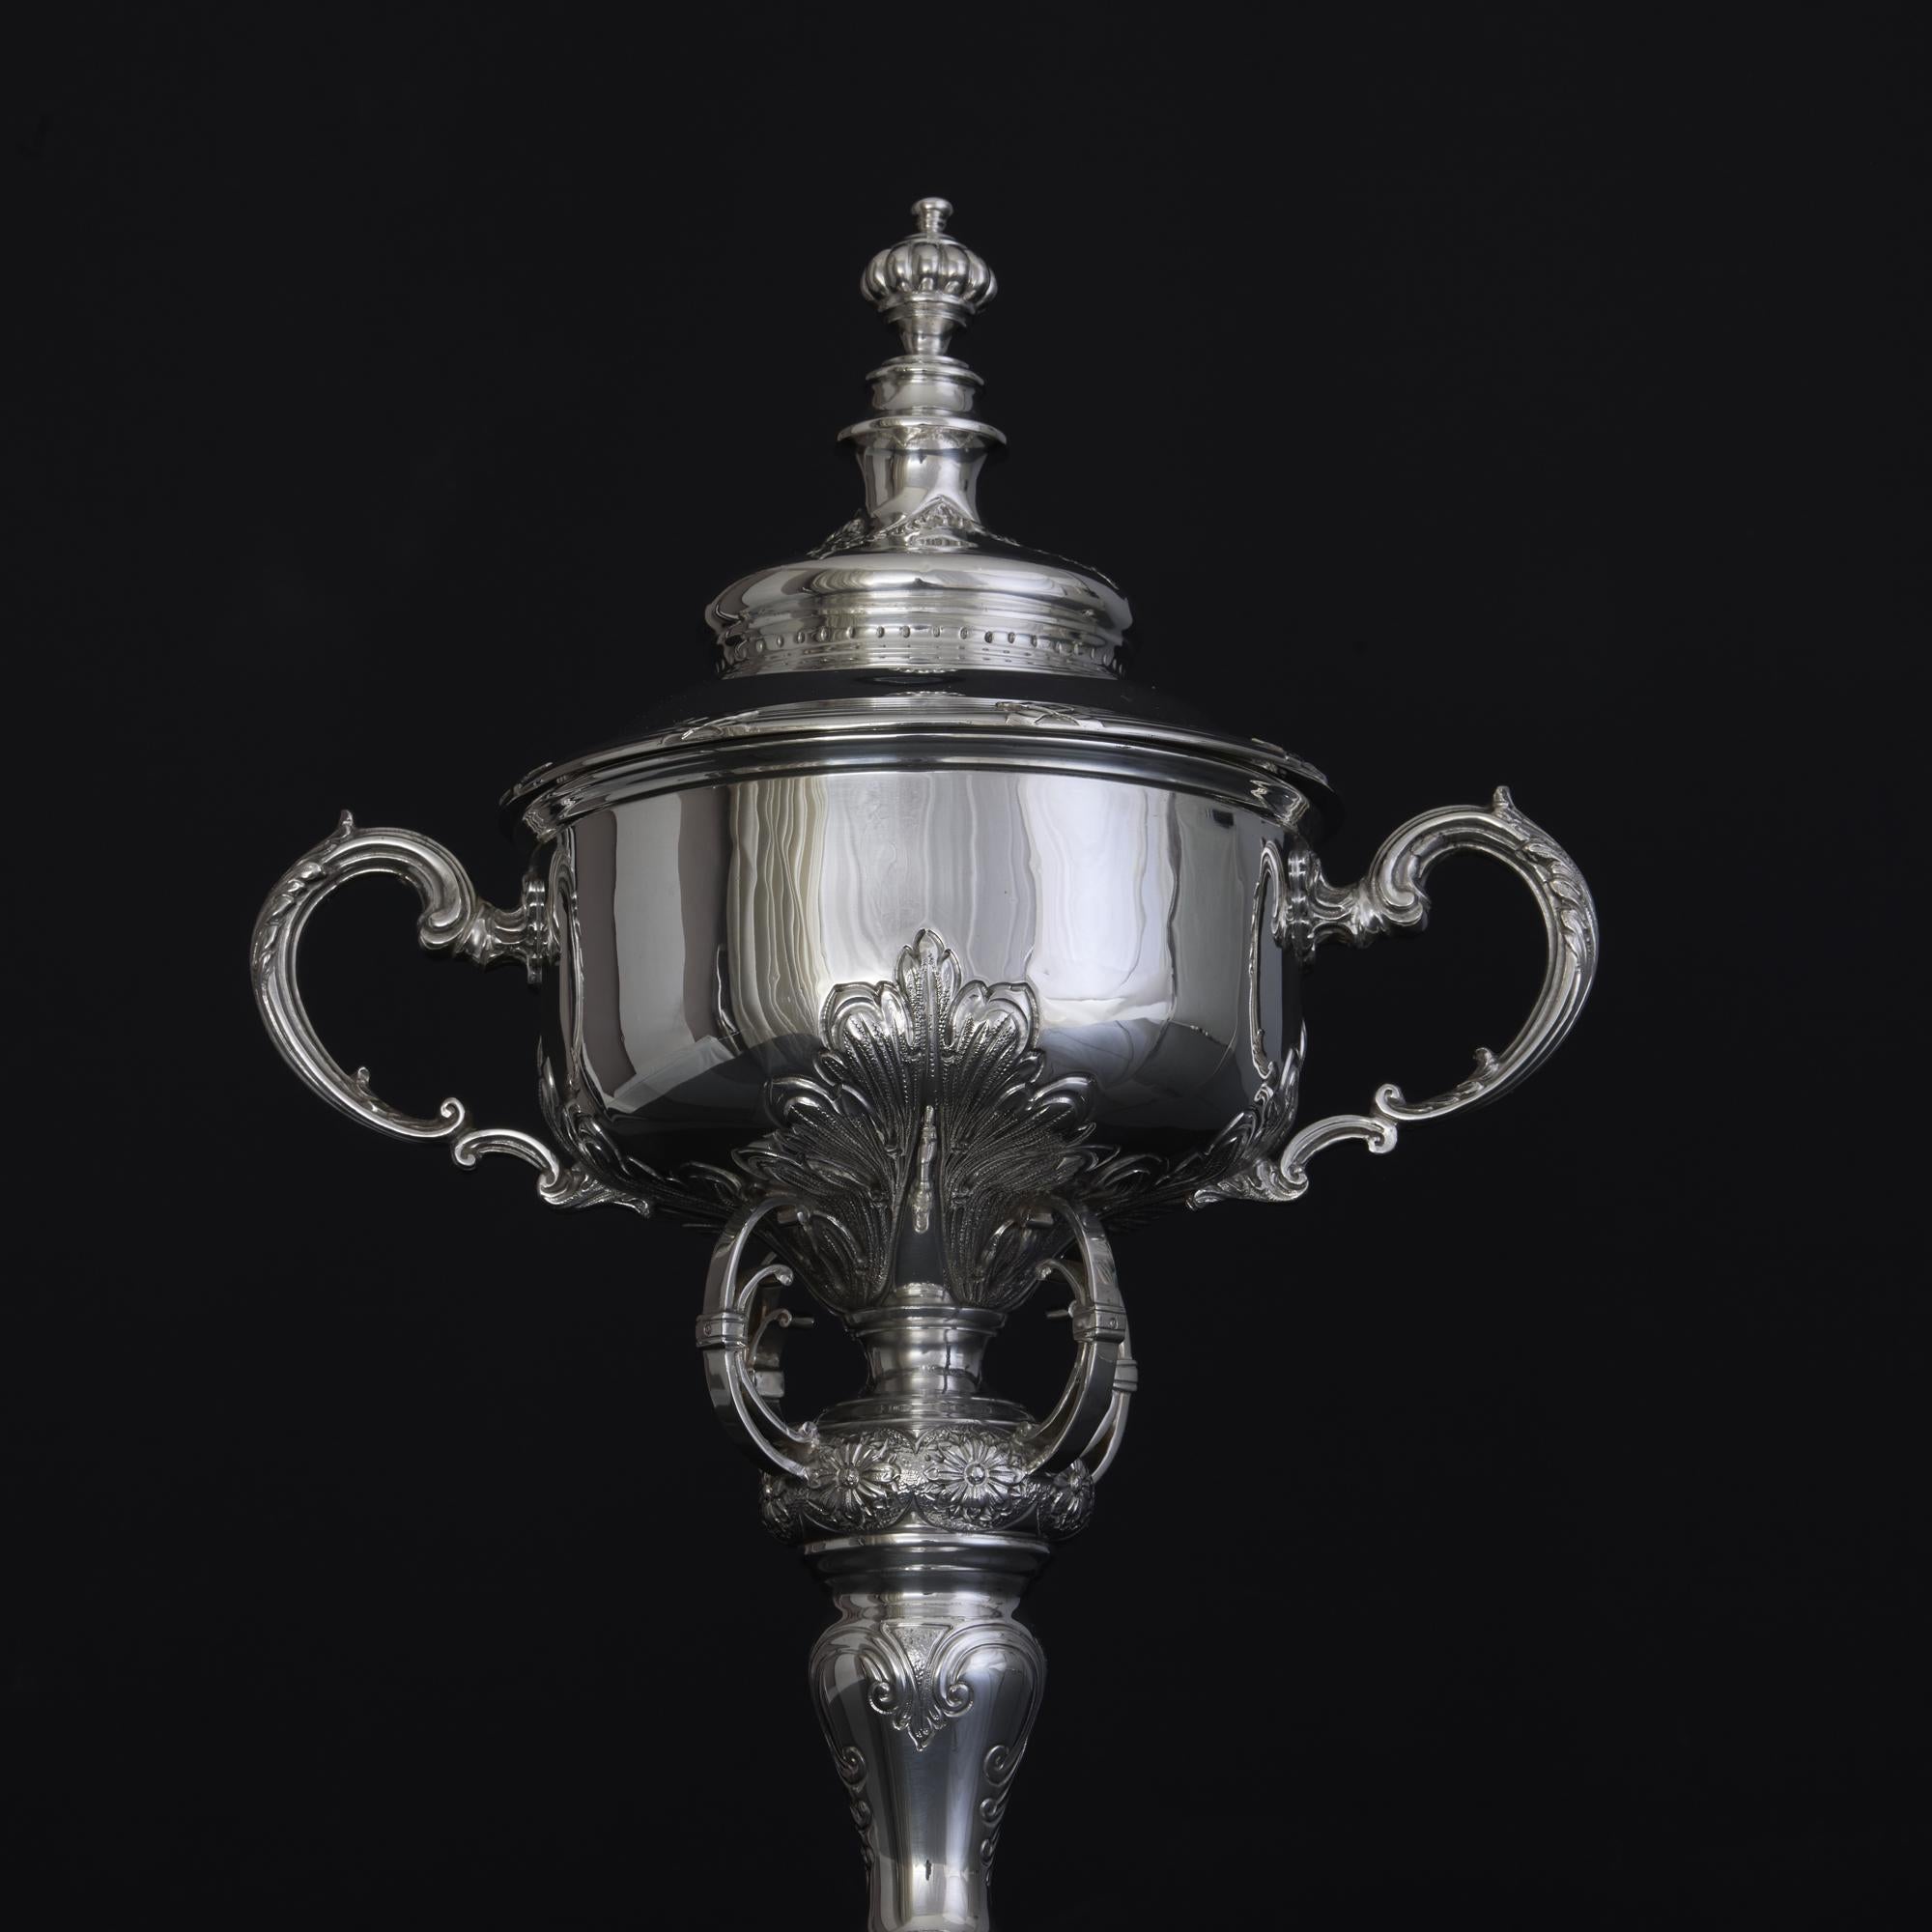 Highly decorated silver trophy cup and cover with hand chased leaf and flowerhead decorations, open-work supports and reed-&-ribbon pattern mounts around the cover which, in turn, is surmounted by a fluted finial.
 The elegant handles are similarly